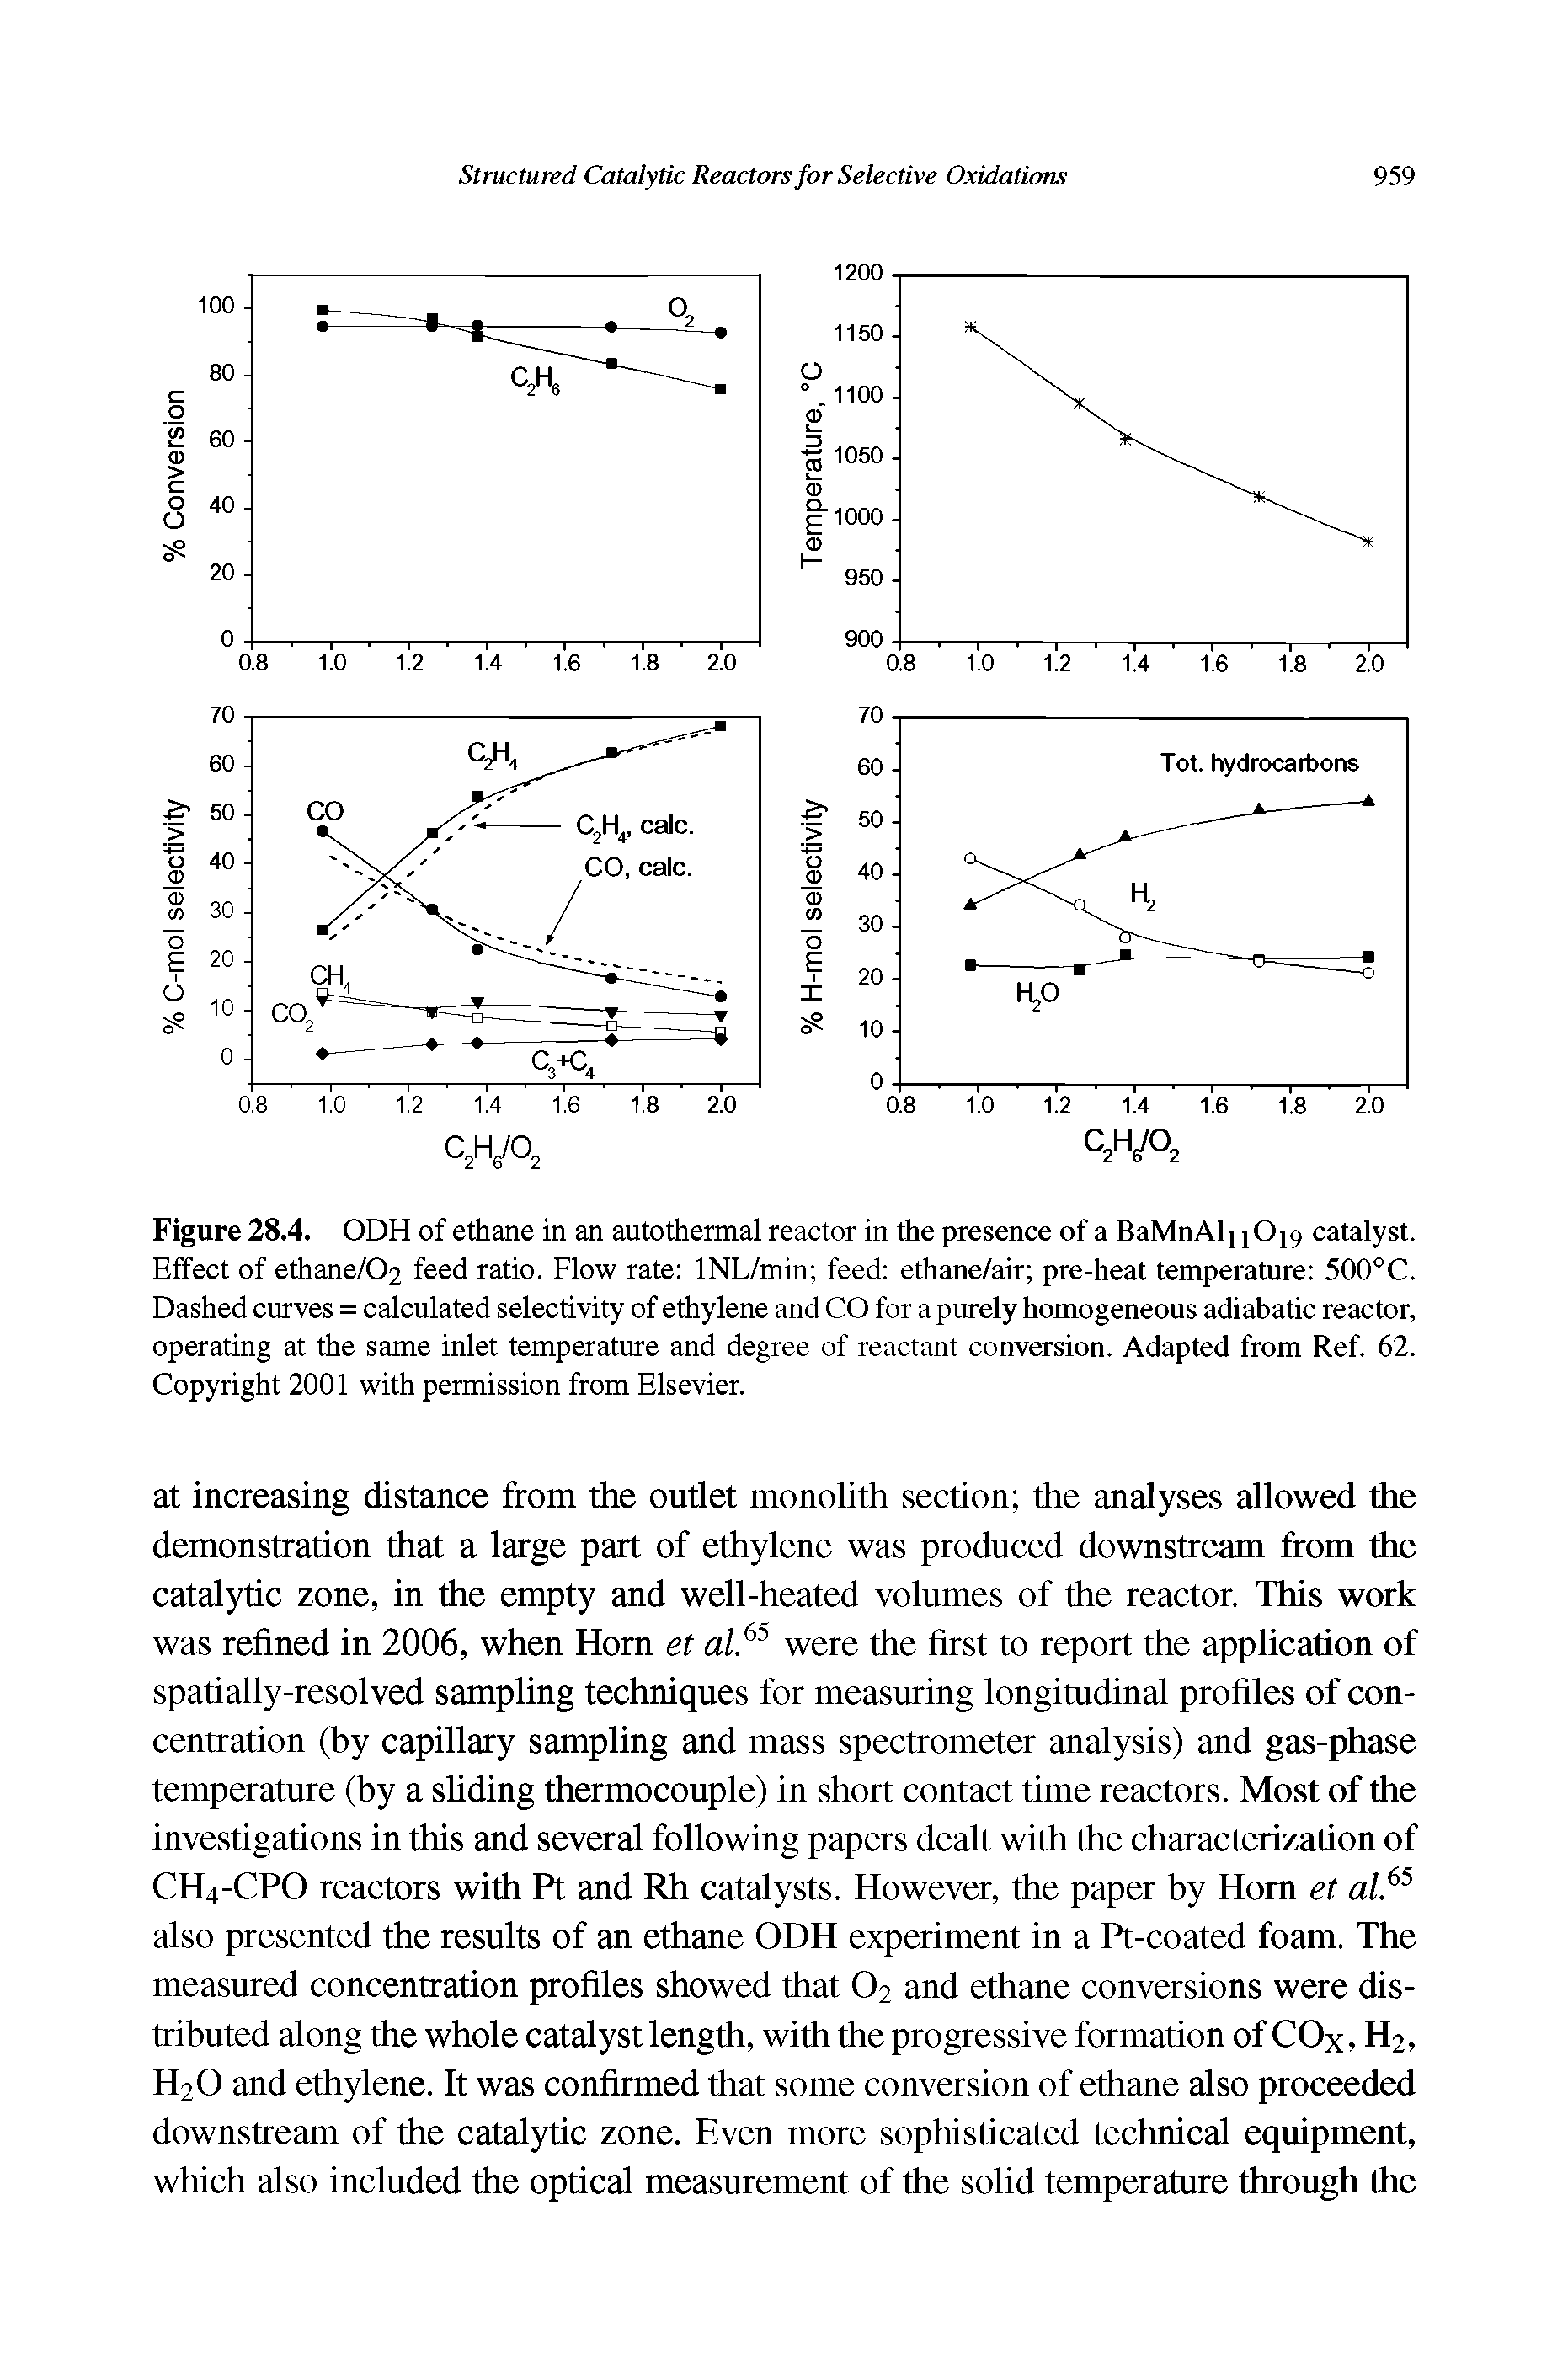 Figure 28.4. ODH of ethane in an autothermal reactor in the presence of a BaMnAli 1O19 catalyst. Effect of ethane/02 feed ratio. Flow rate INL/min feed ethane/air pre-heat temperature 500 C. Dashed curves = calculated selectivity of ethylene and CO for a purely homogeneous adiabatic reactor, operating at the same inlet temperature and degree of reactant conversion. Adapted from Ref. 62. Copyright 2001 with permission from Elsevier.